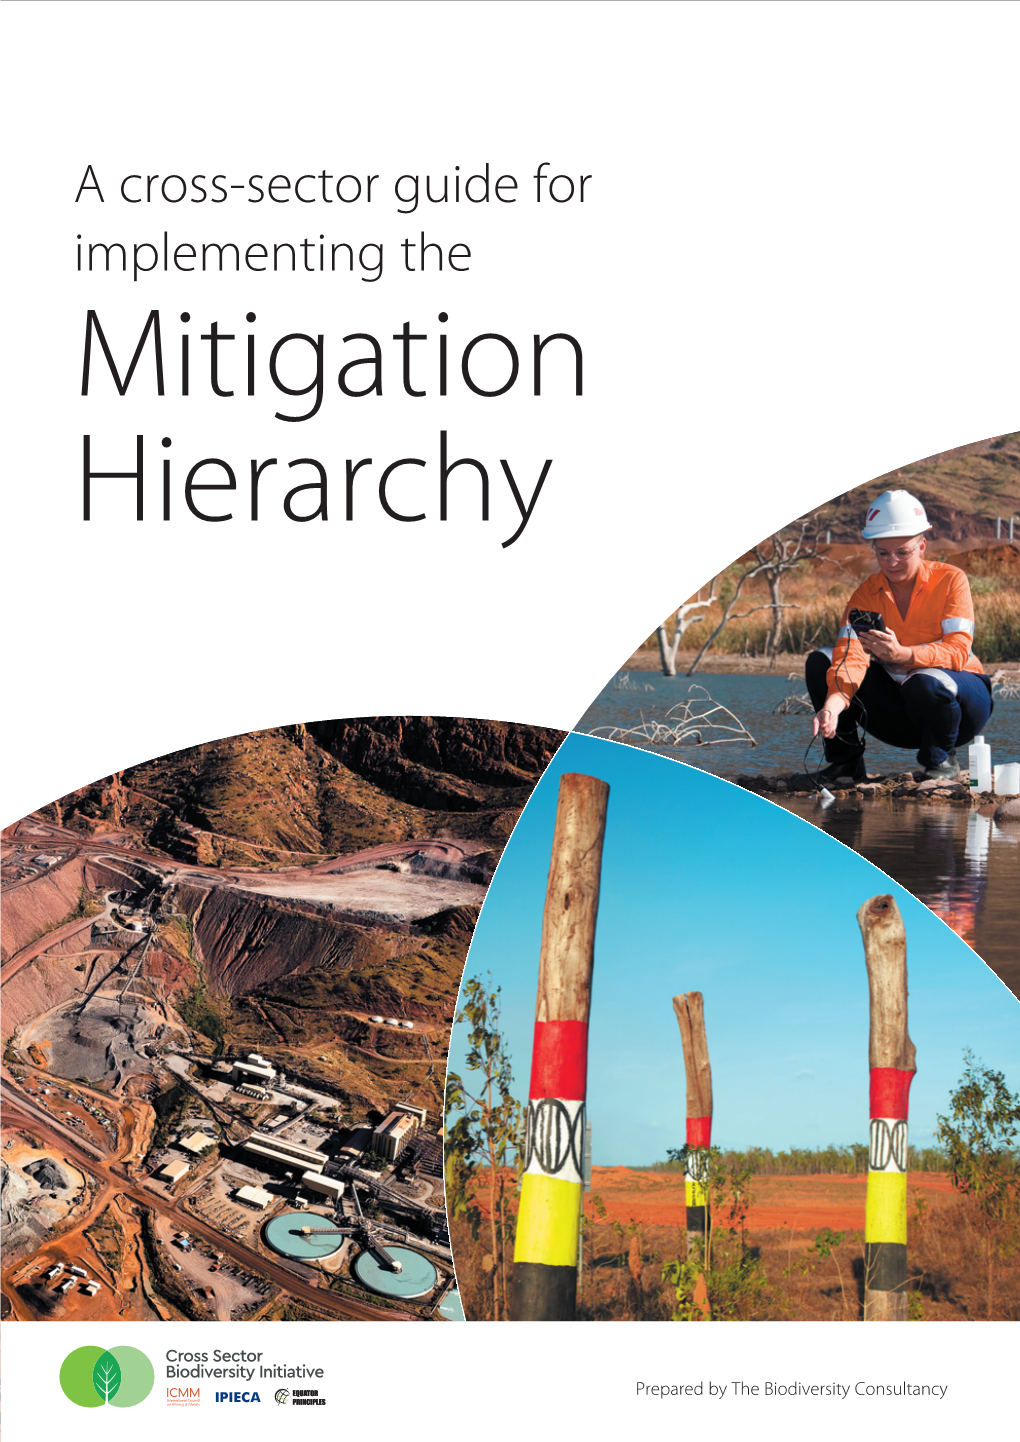 A Cross-Sector Guide for Implementing the Mitigation Hierarchy